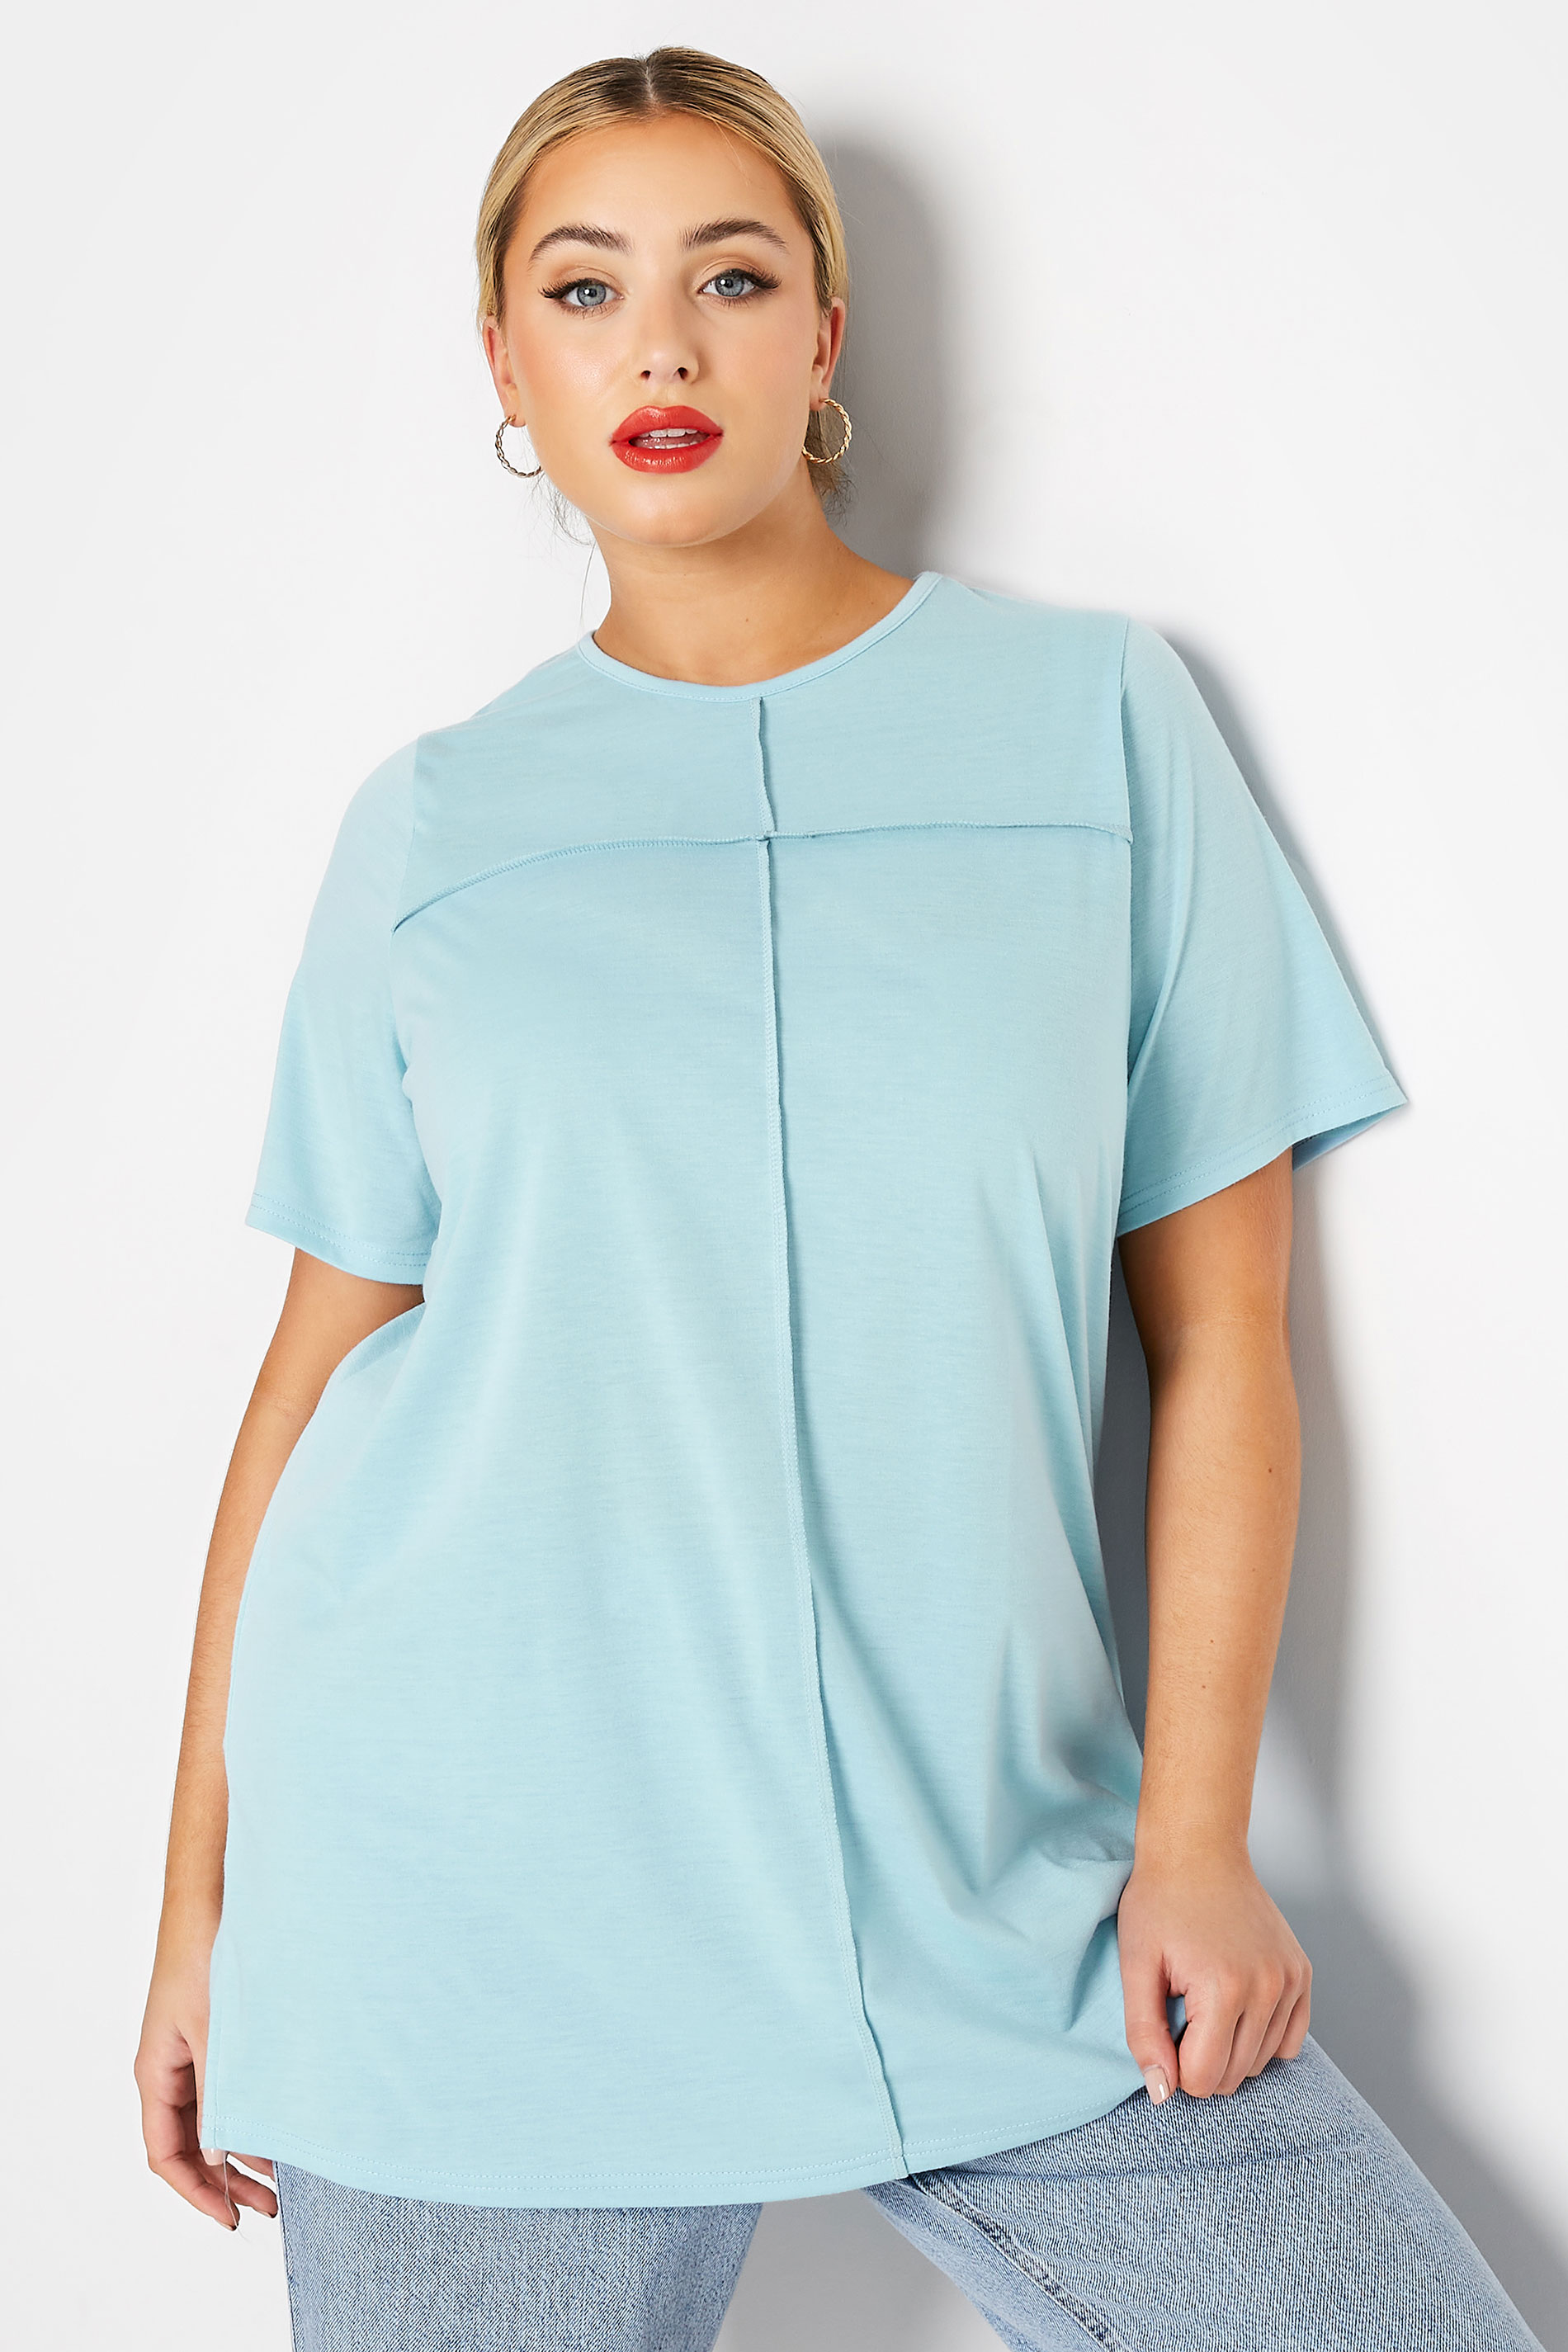 Grande taille  Tops Grande taille  T-Shirts | LIMITED COLLECTION - T-Shirt Bleu Ciel Couture en Jersey - RT66493